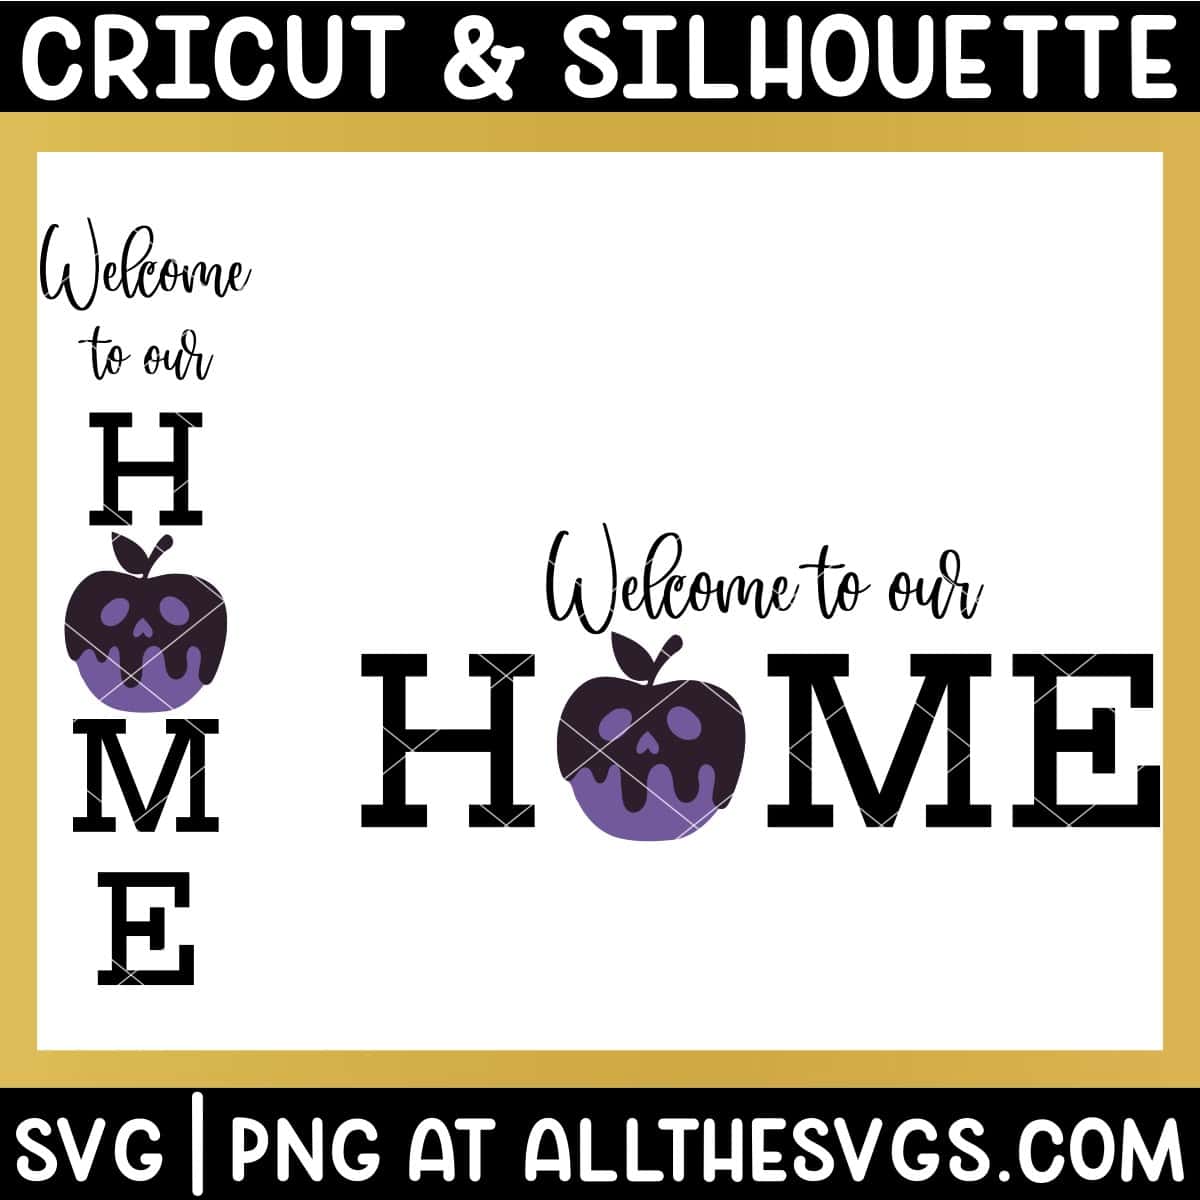 welcome to our home sign svg file with poison apple.